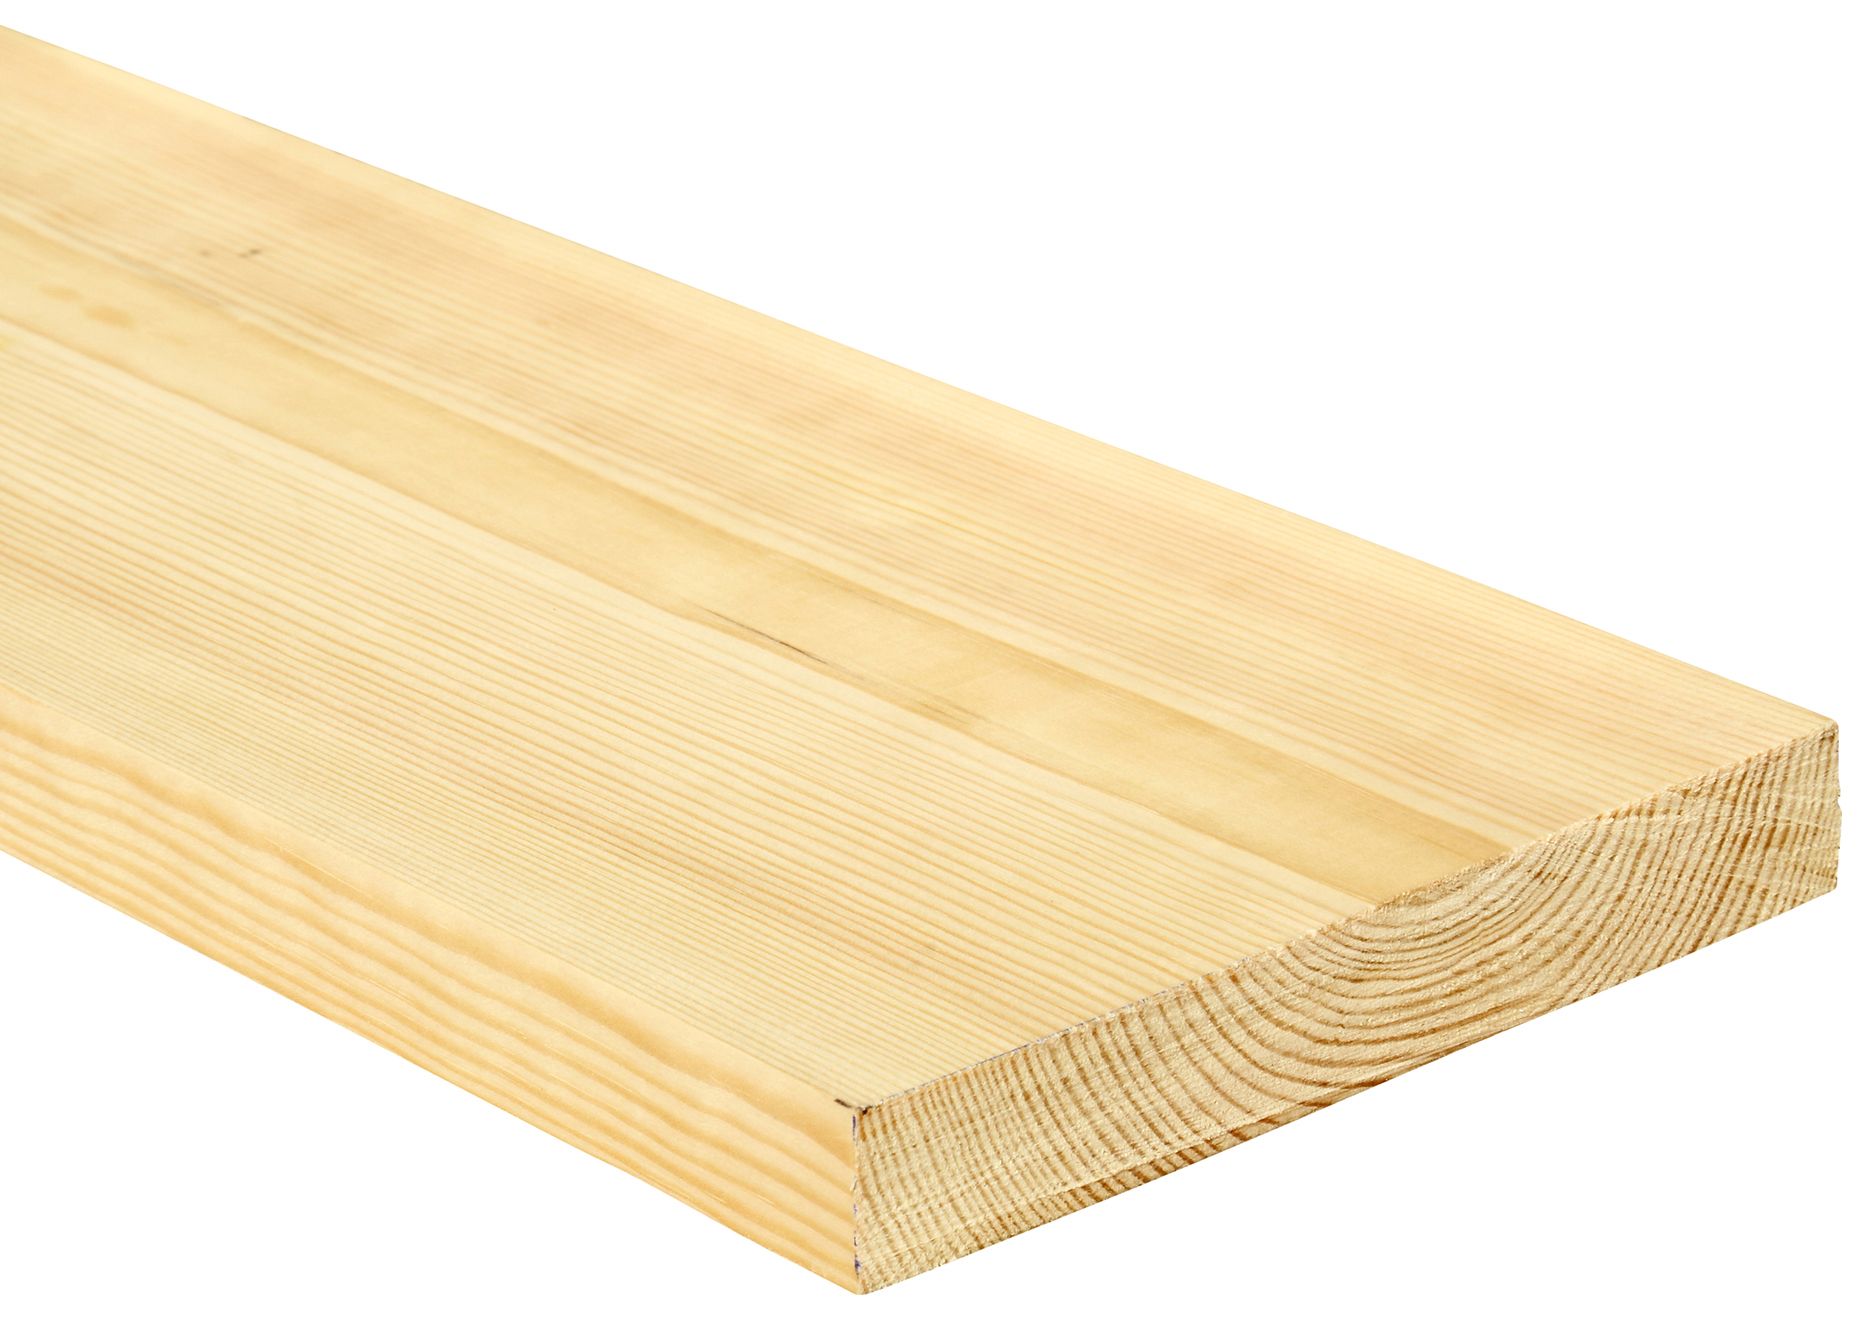 Wickes Redwood PSE Timber - 20.5 x 144 x 1800mm